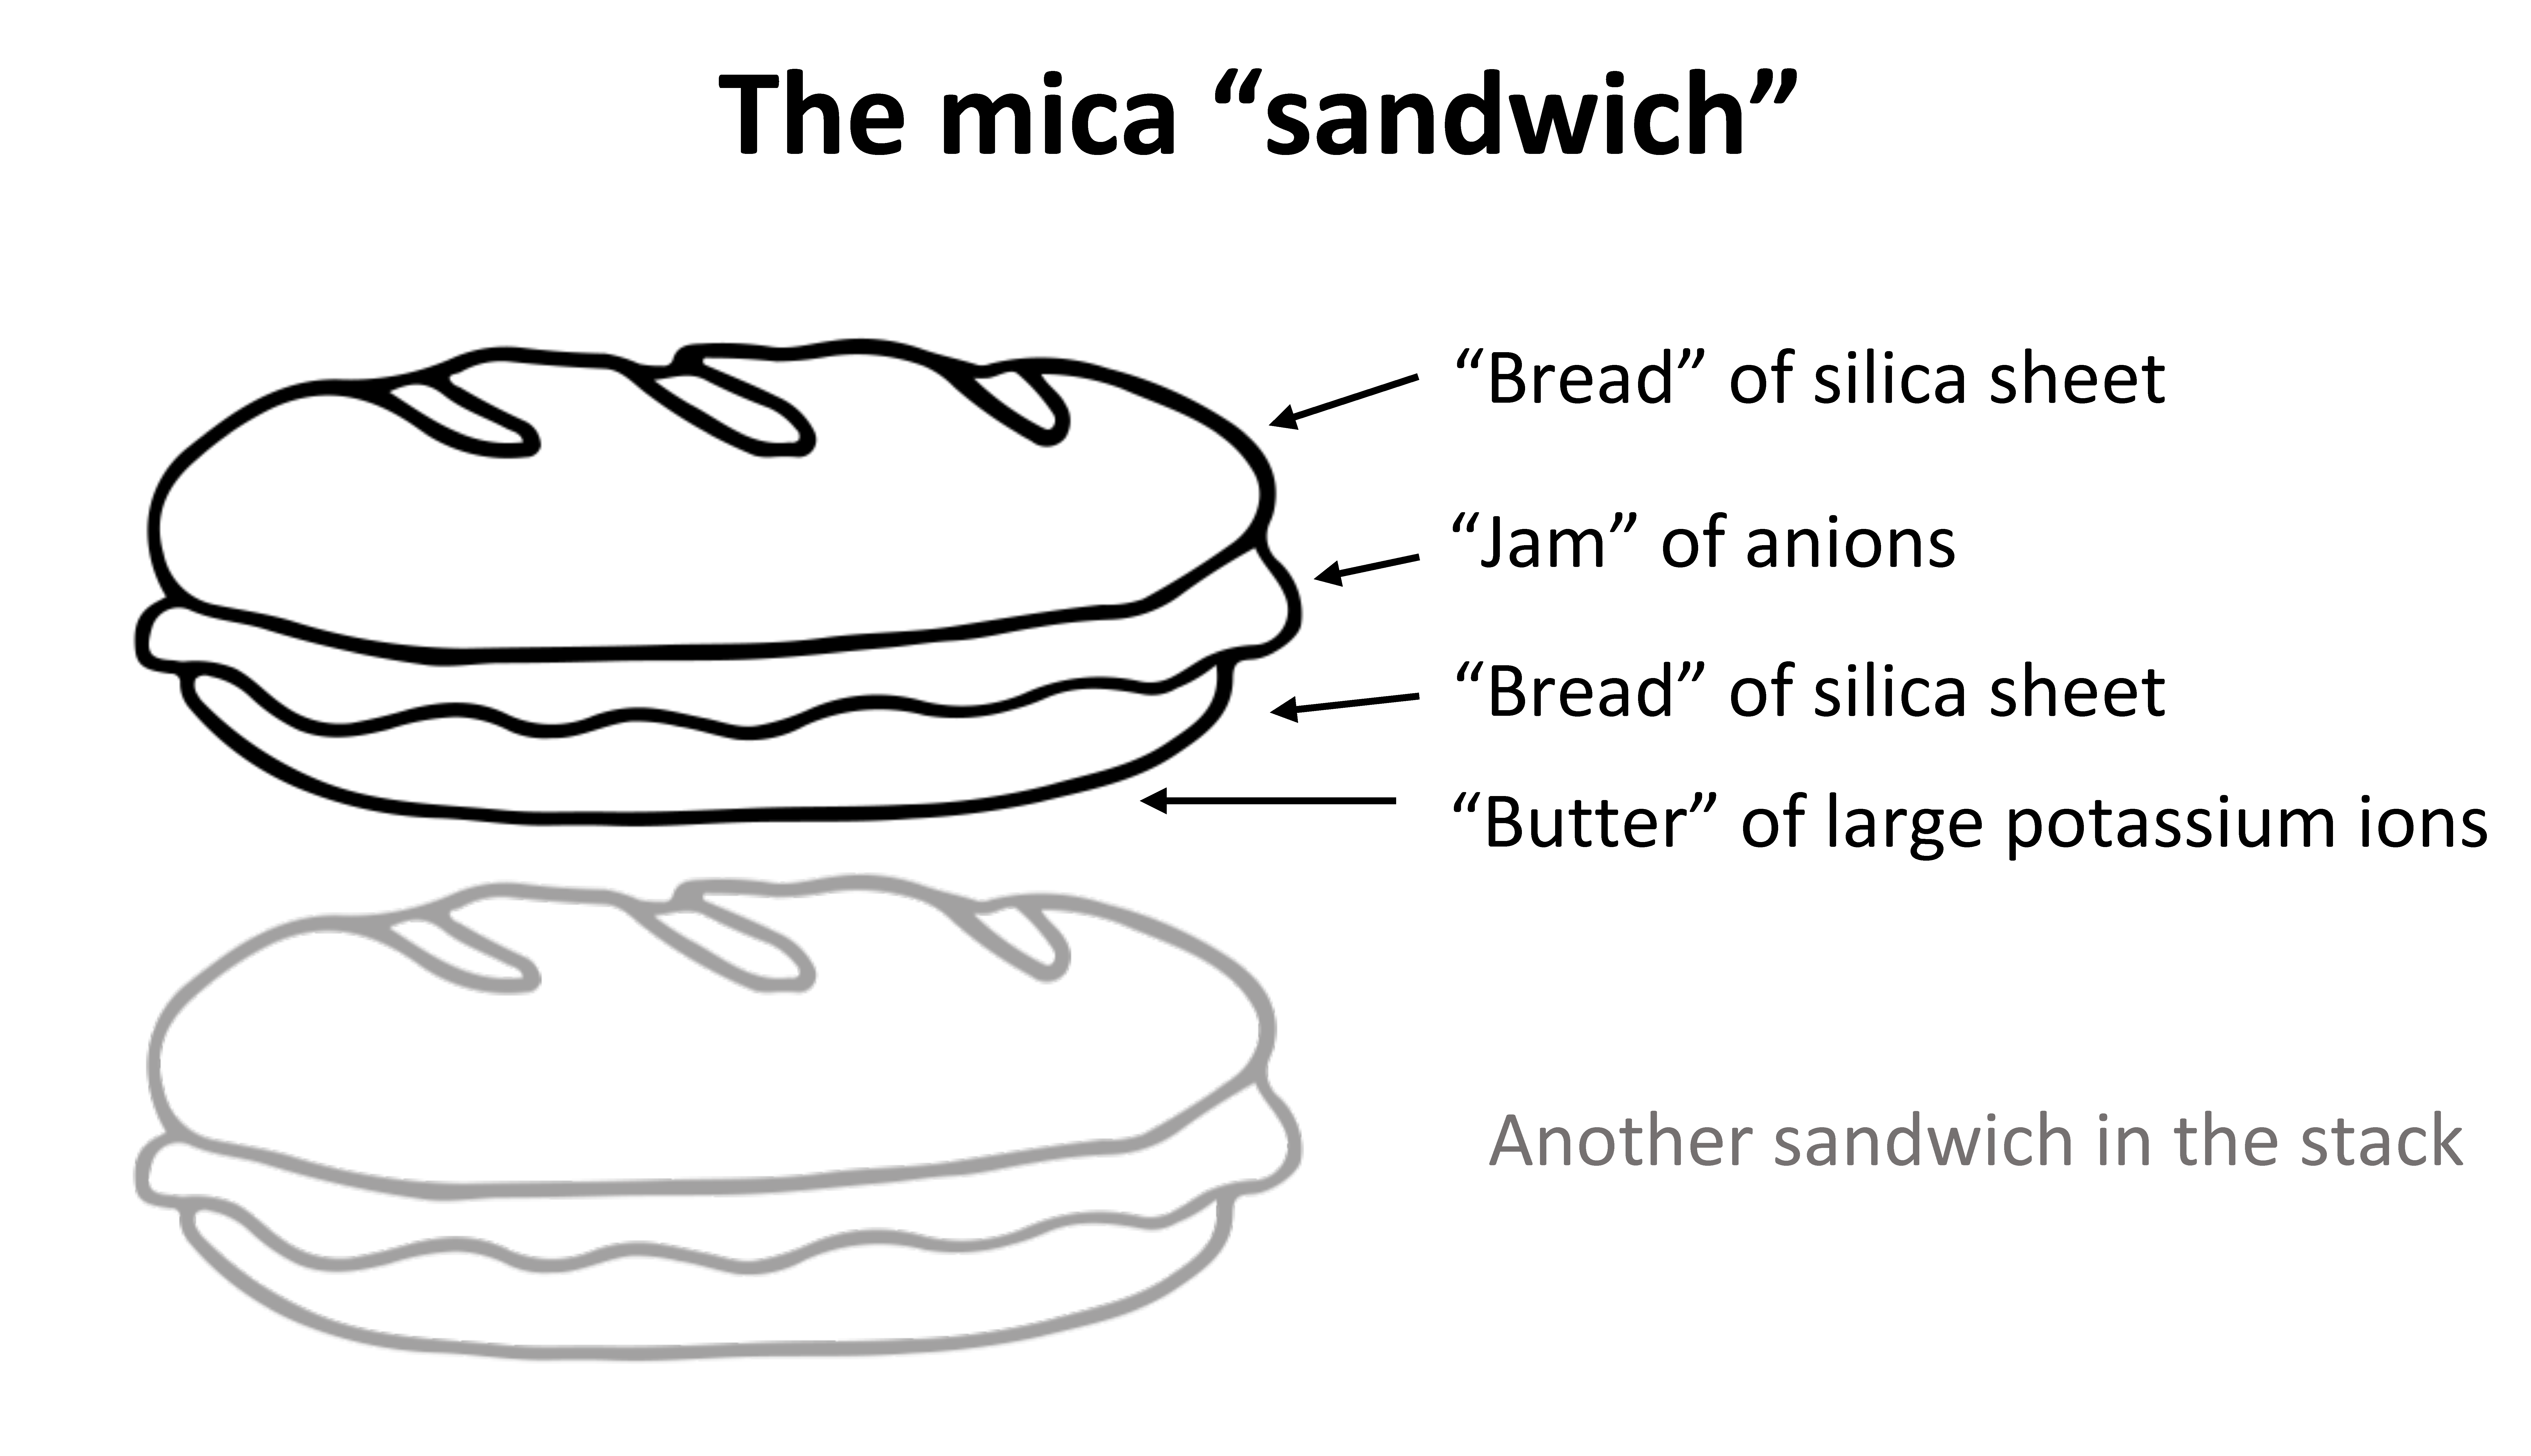 Silica sheets layered in mica like bread and hjam in a stack of sandwiches